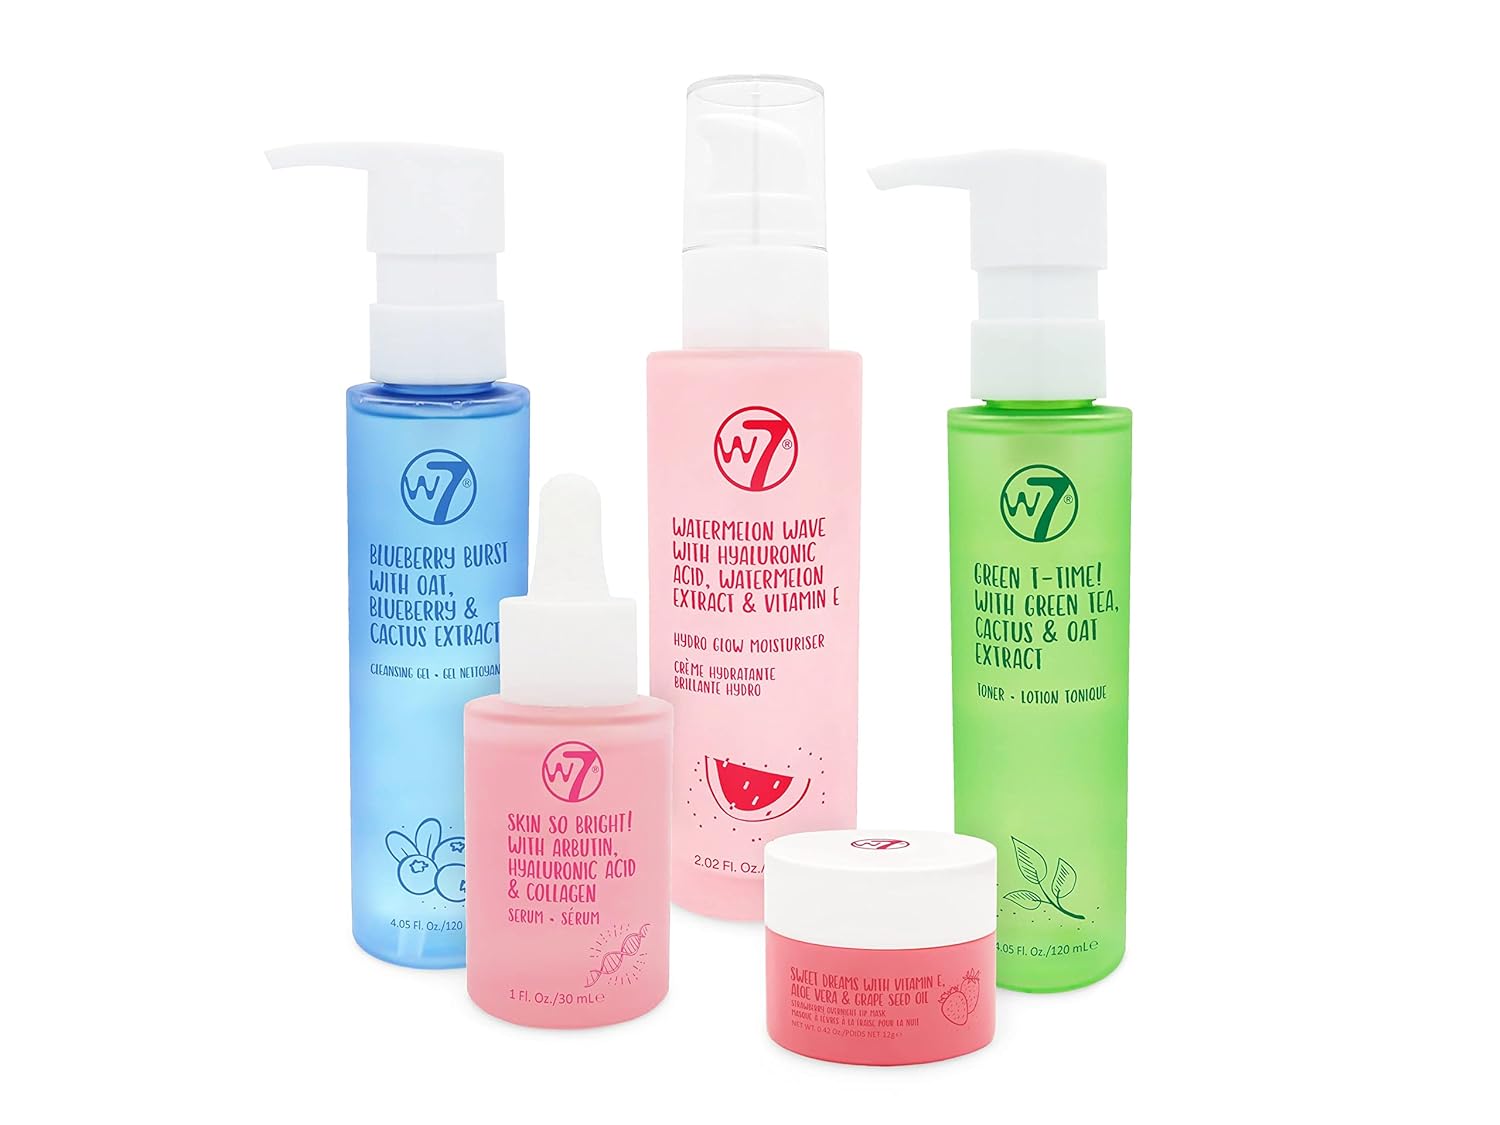 Professional Product Title: "W7 5-Step Daily Self-Care Skincare Set with Moisturizer, Serum, Toner, Cleanser & Lip Mask - Full Size Skin Care Kit for Natural Beauty"